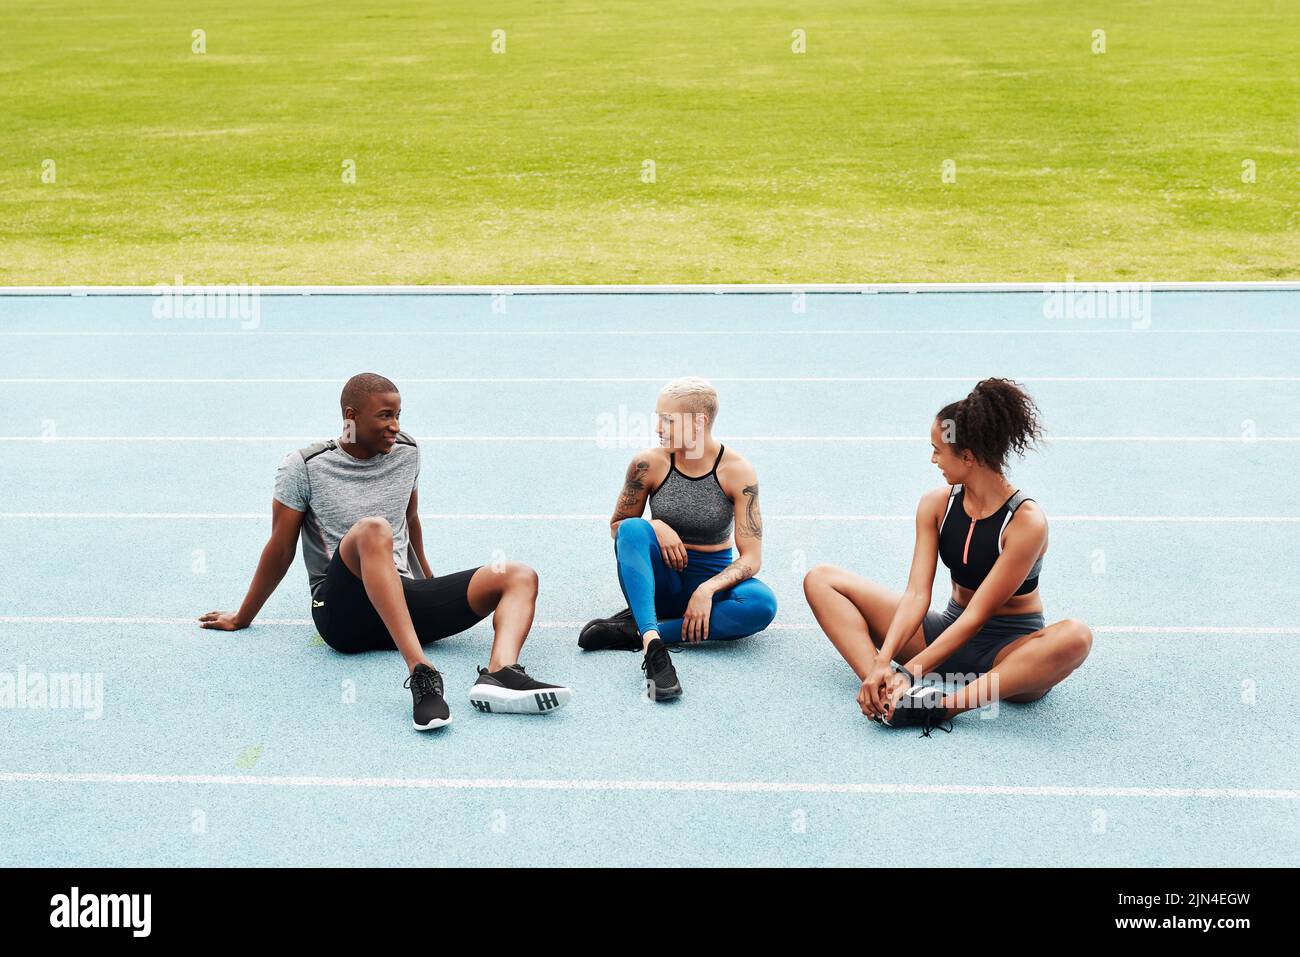 Relaxing after the race. Full length shot of a diverse group of athletes sitting together after a team training session on a running track. Stock Photo